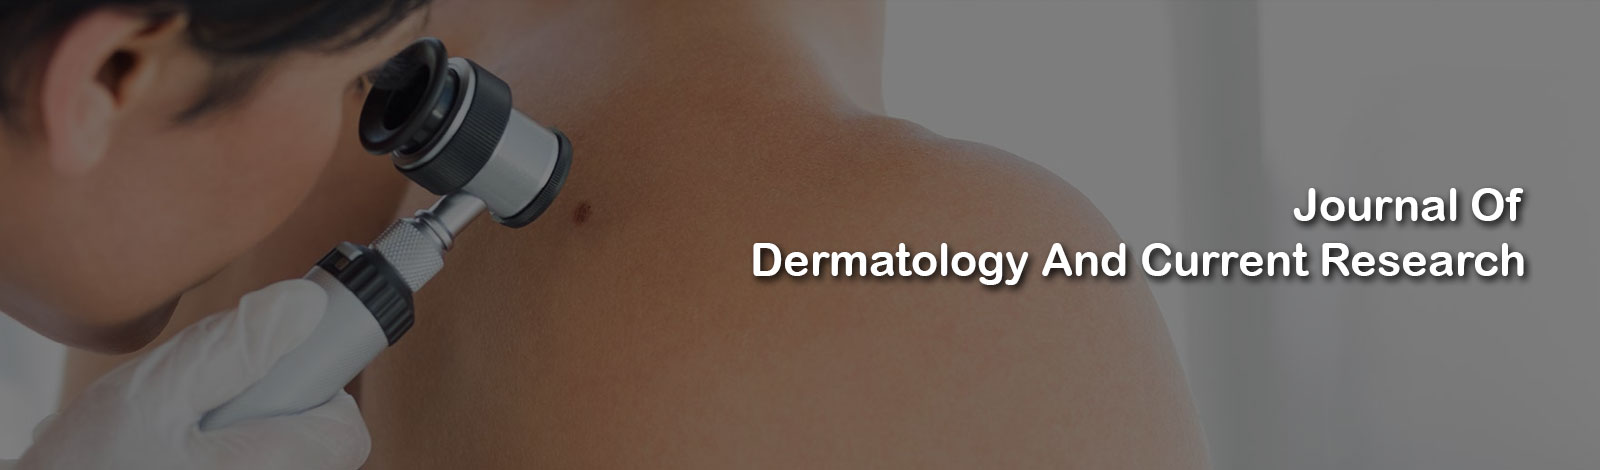 Journal of Dermatology and Current Research